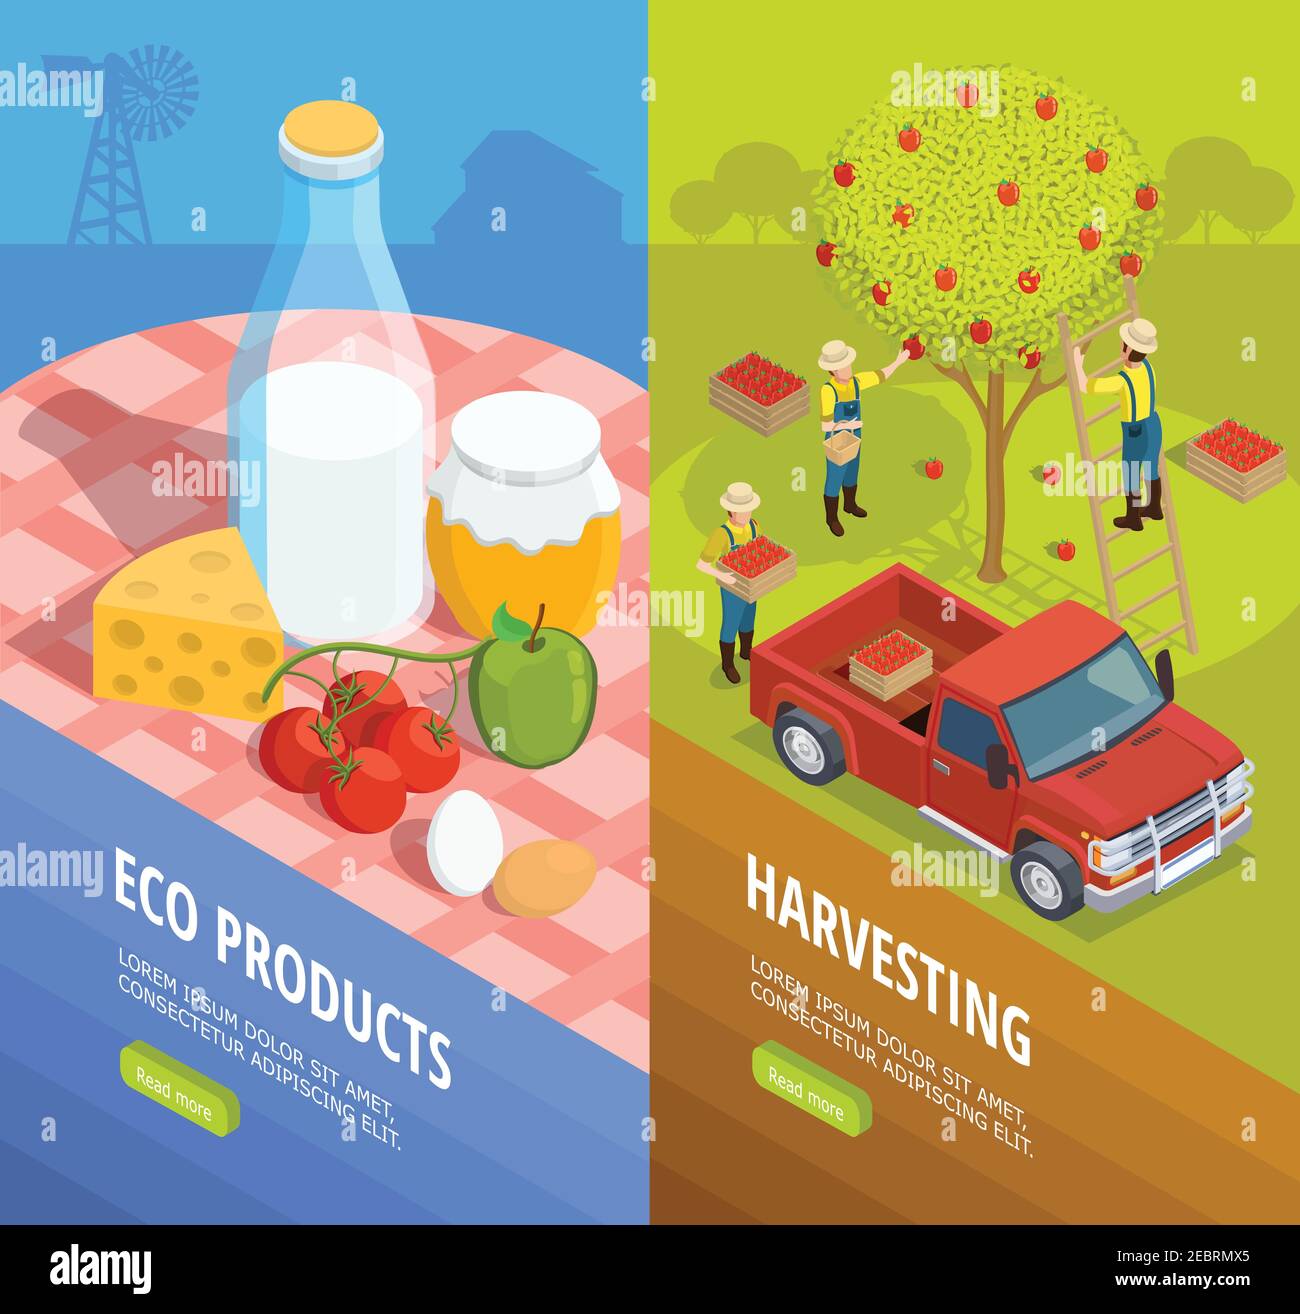 Two vertical isometric farm banner set with eco products and harvesting descriptions vector illustration Stock Vector